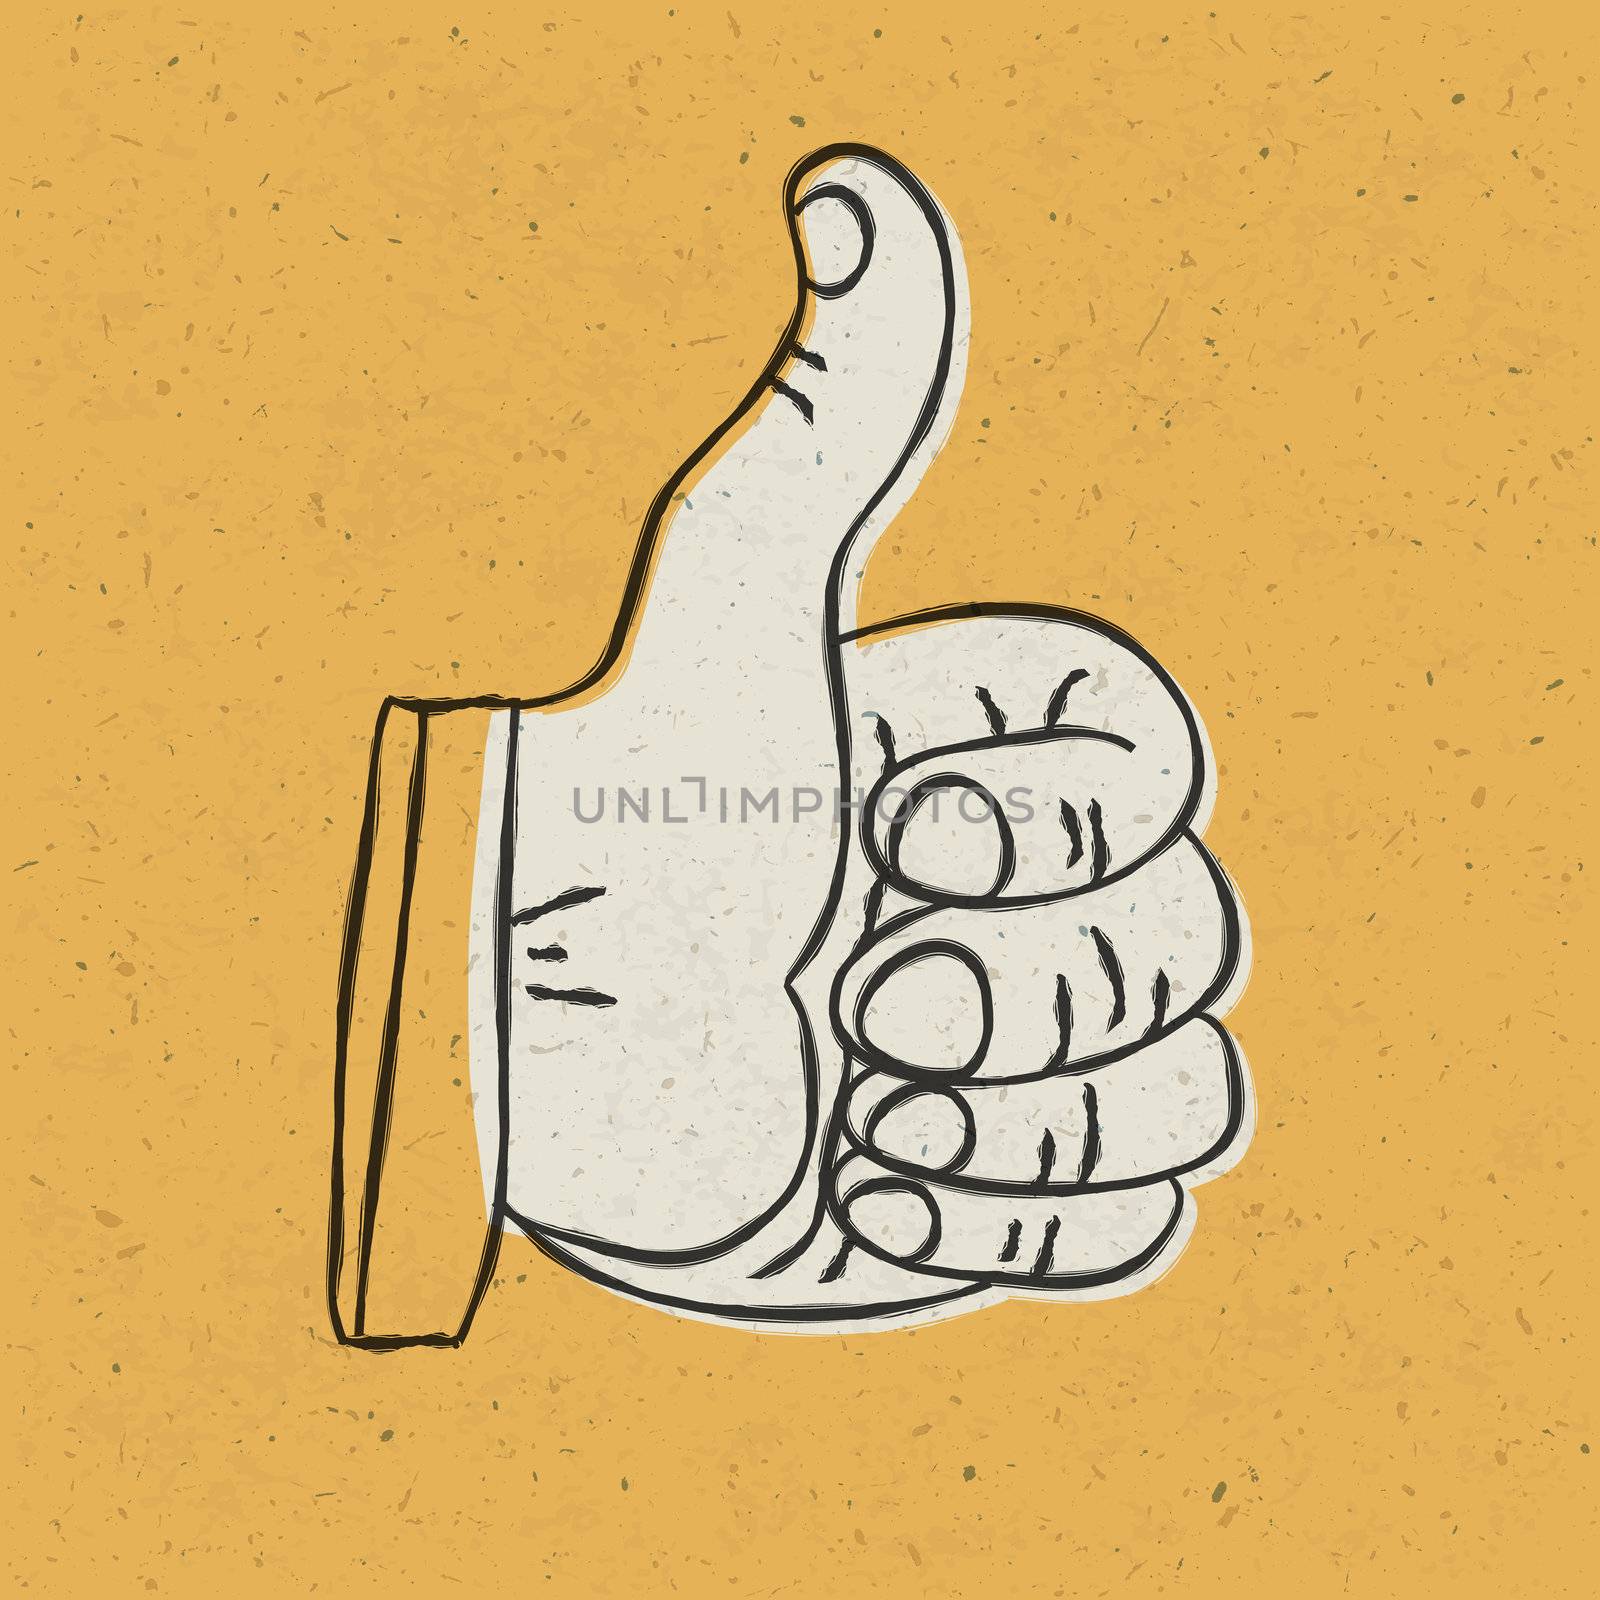 Retro styled thumb up symbol on yellow textured background. Vect by pashabo